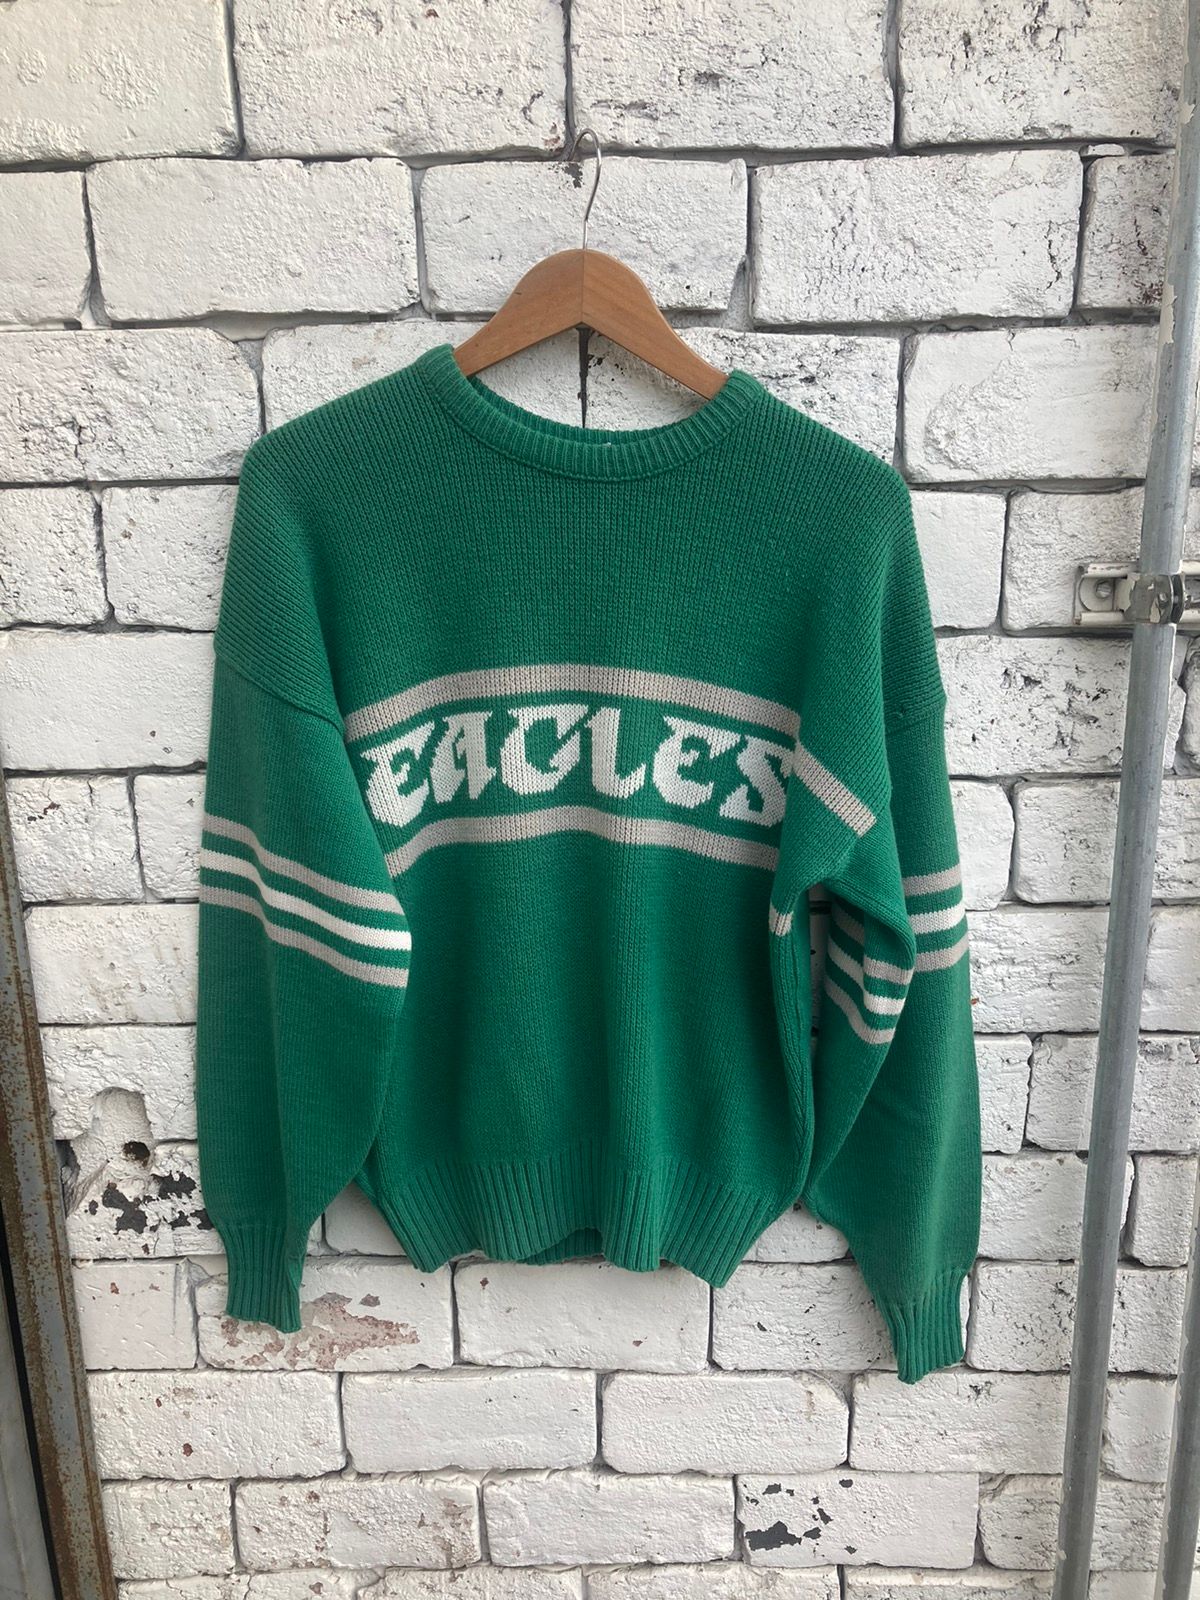 cliff engle eagles sweater